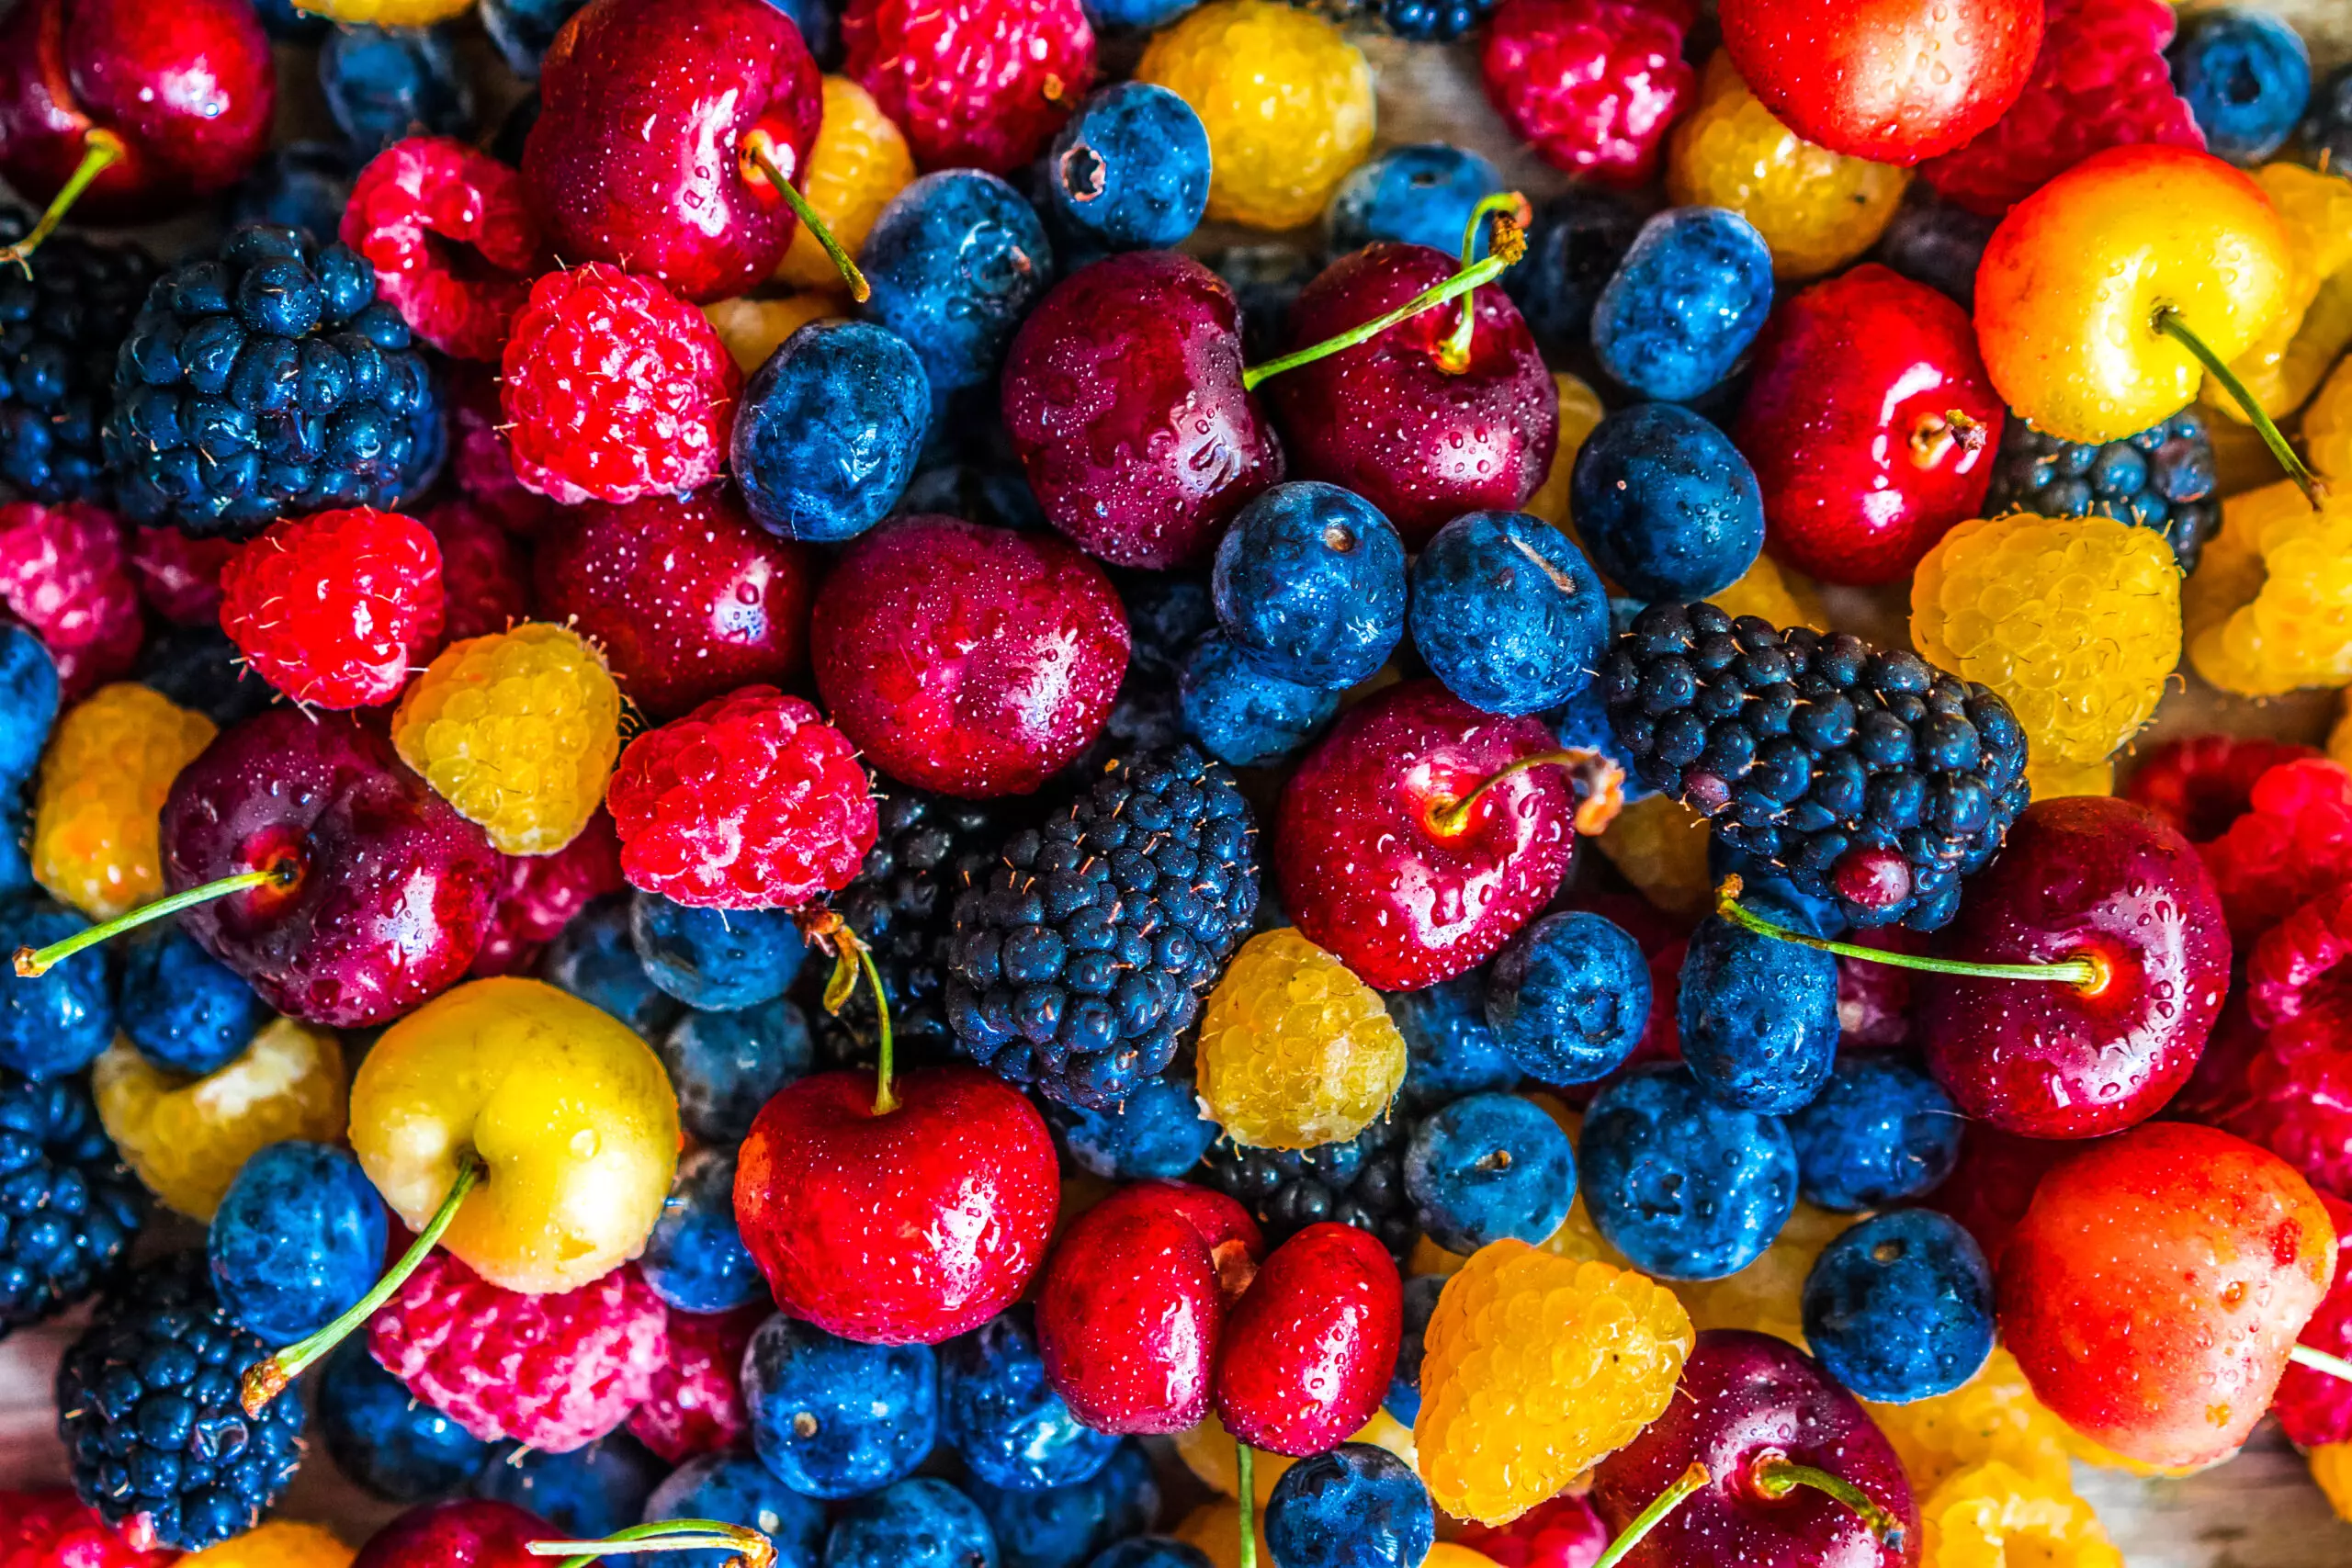 Assorted fresh colorful berries close-up.